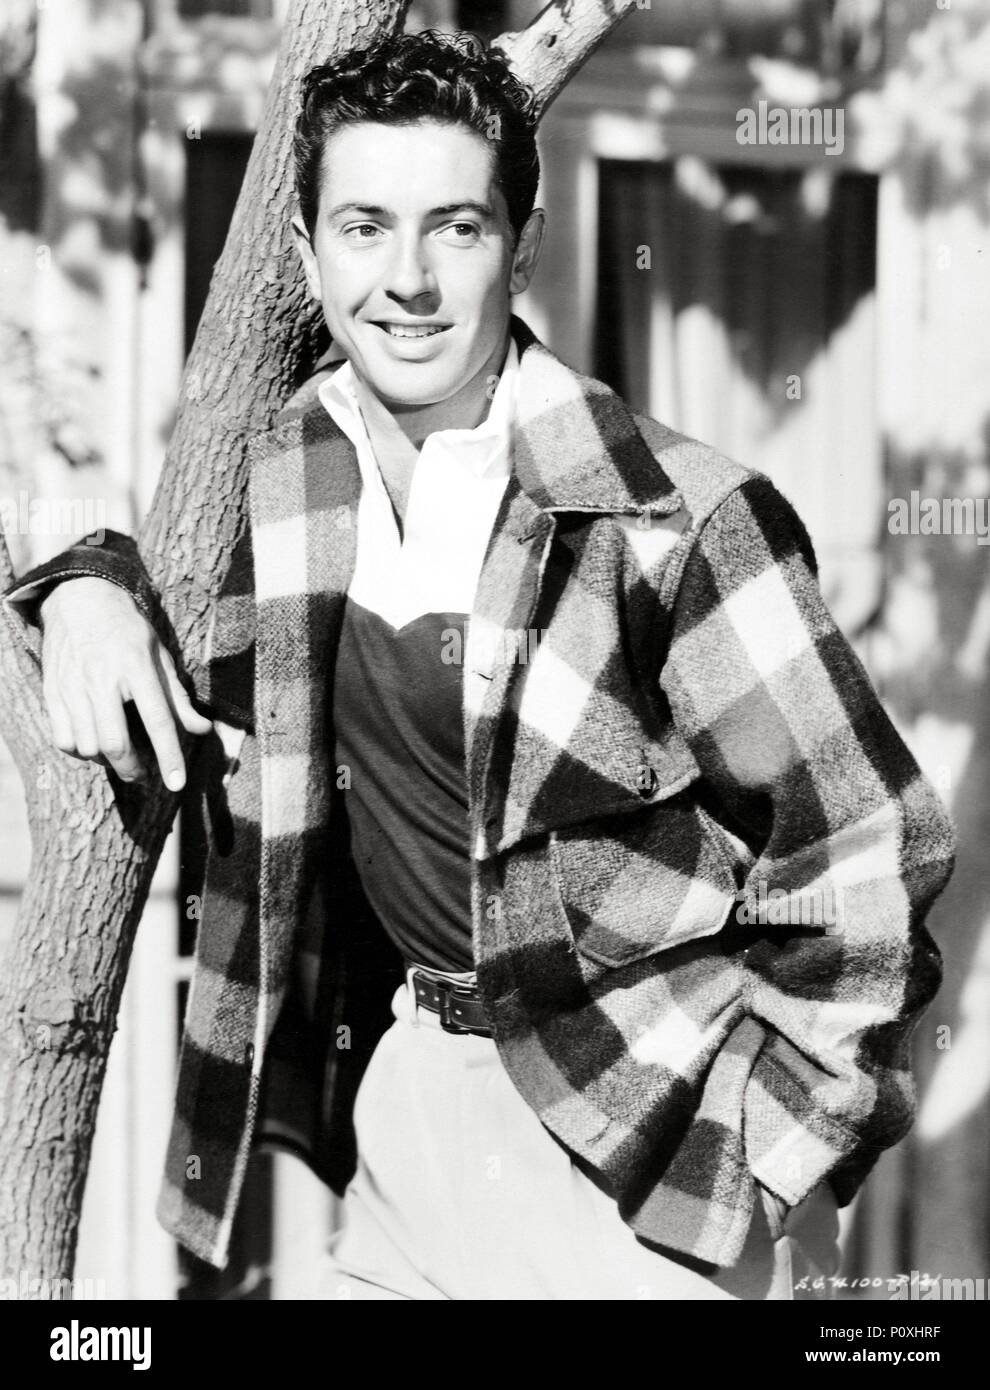 Original Film Title: OUR VERY OWN.  English Title: OUR VERY OWN.  Film Director: DAVID MILLER.  Year: 1950.  Stars: FARLEY GRANGER. Credit: RKO / Album Stock Photo